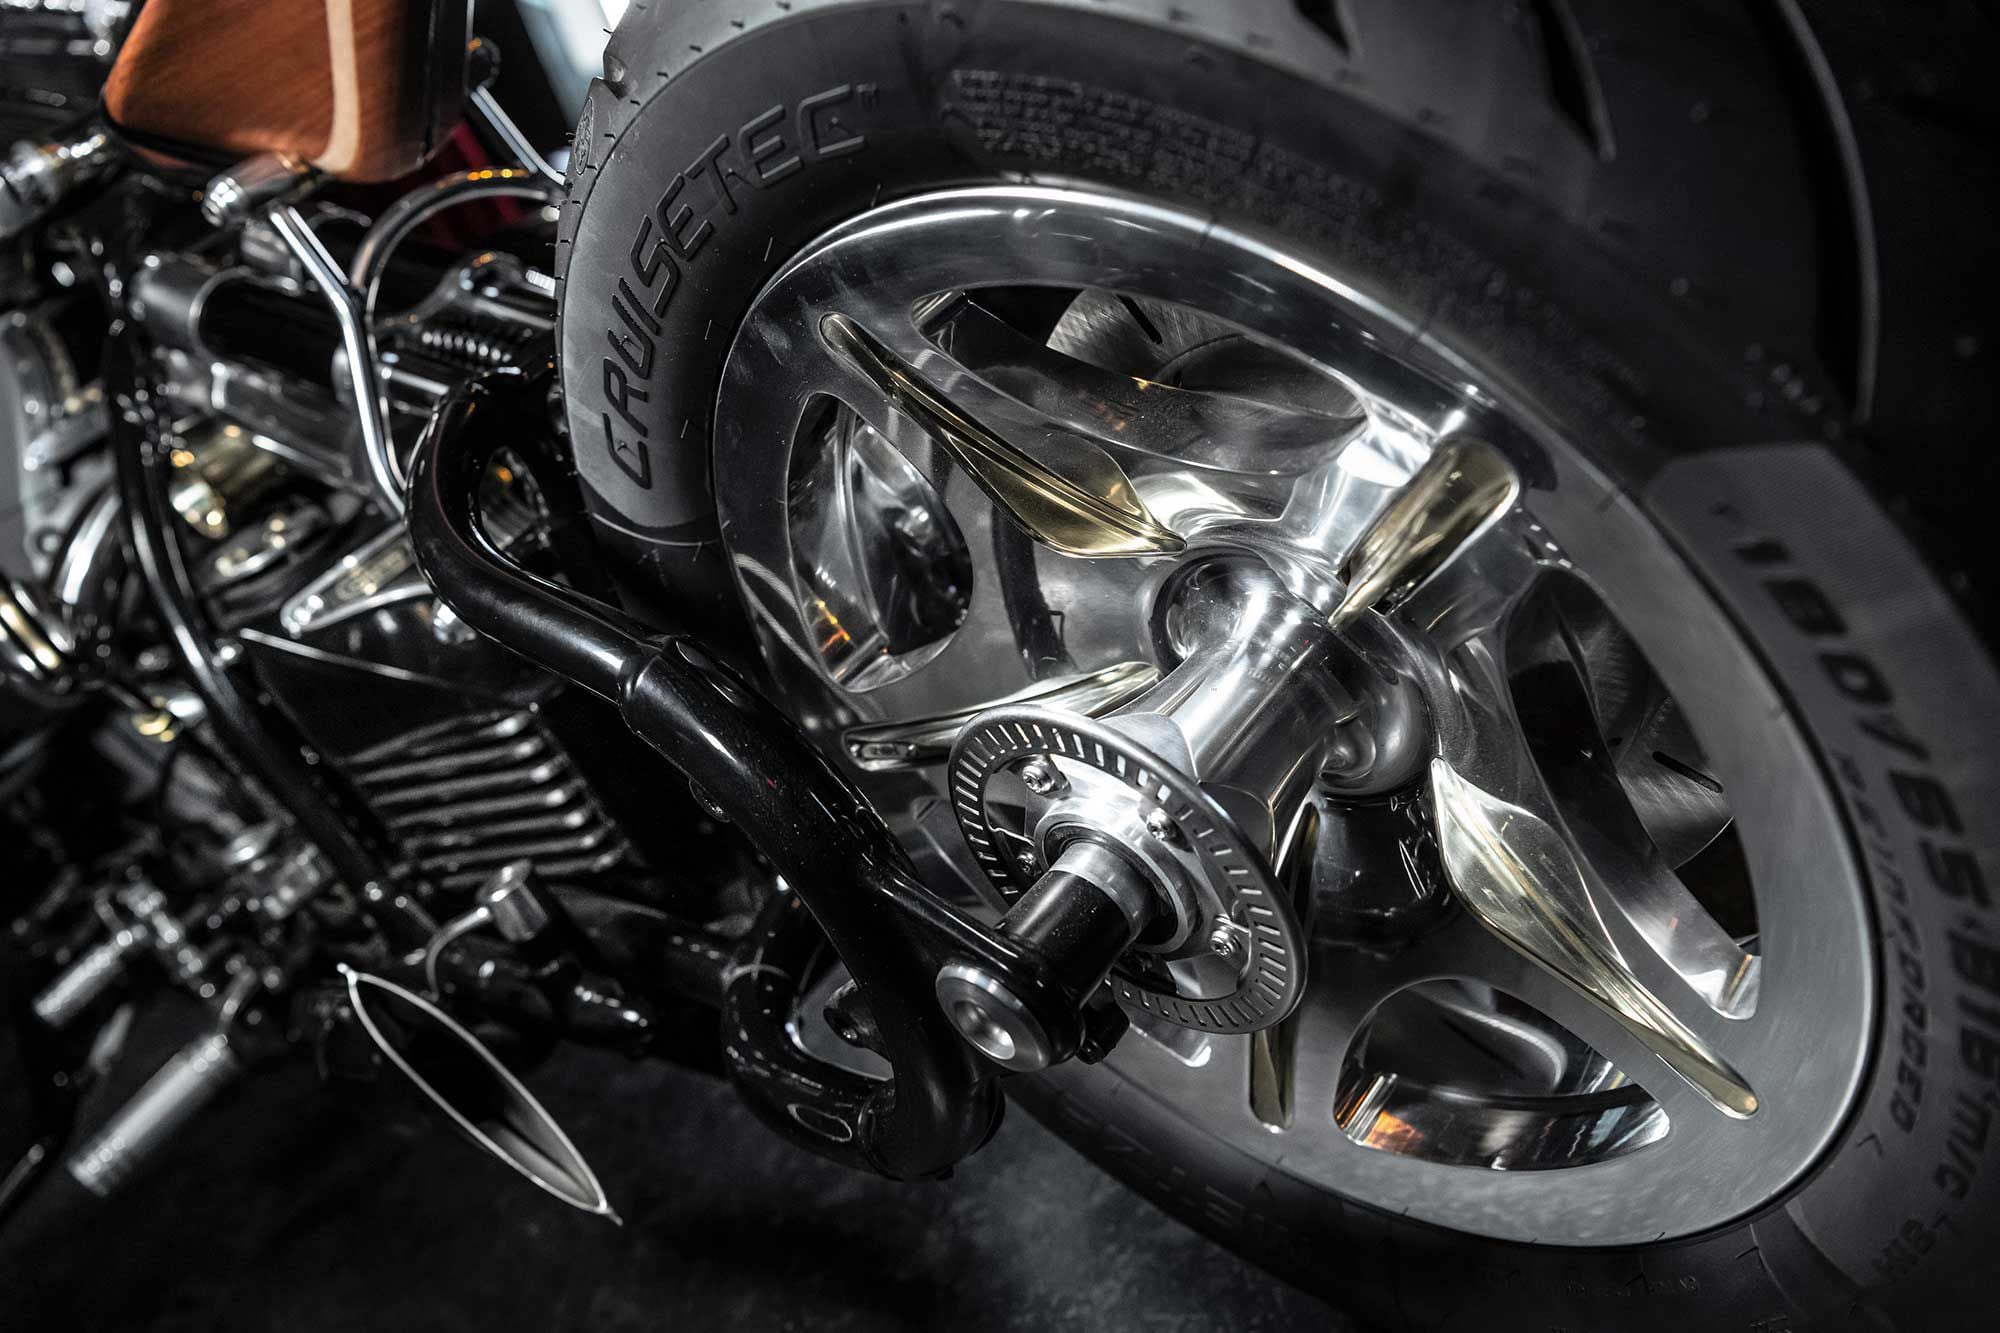 The only pieces to use modern manufacturing techniques are the wheels, which are machined from billet (though from a Radikal Chopper design). Even the brake discs and calipers were specially created.